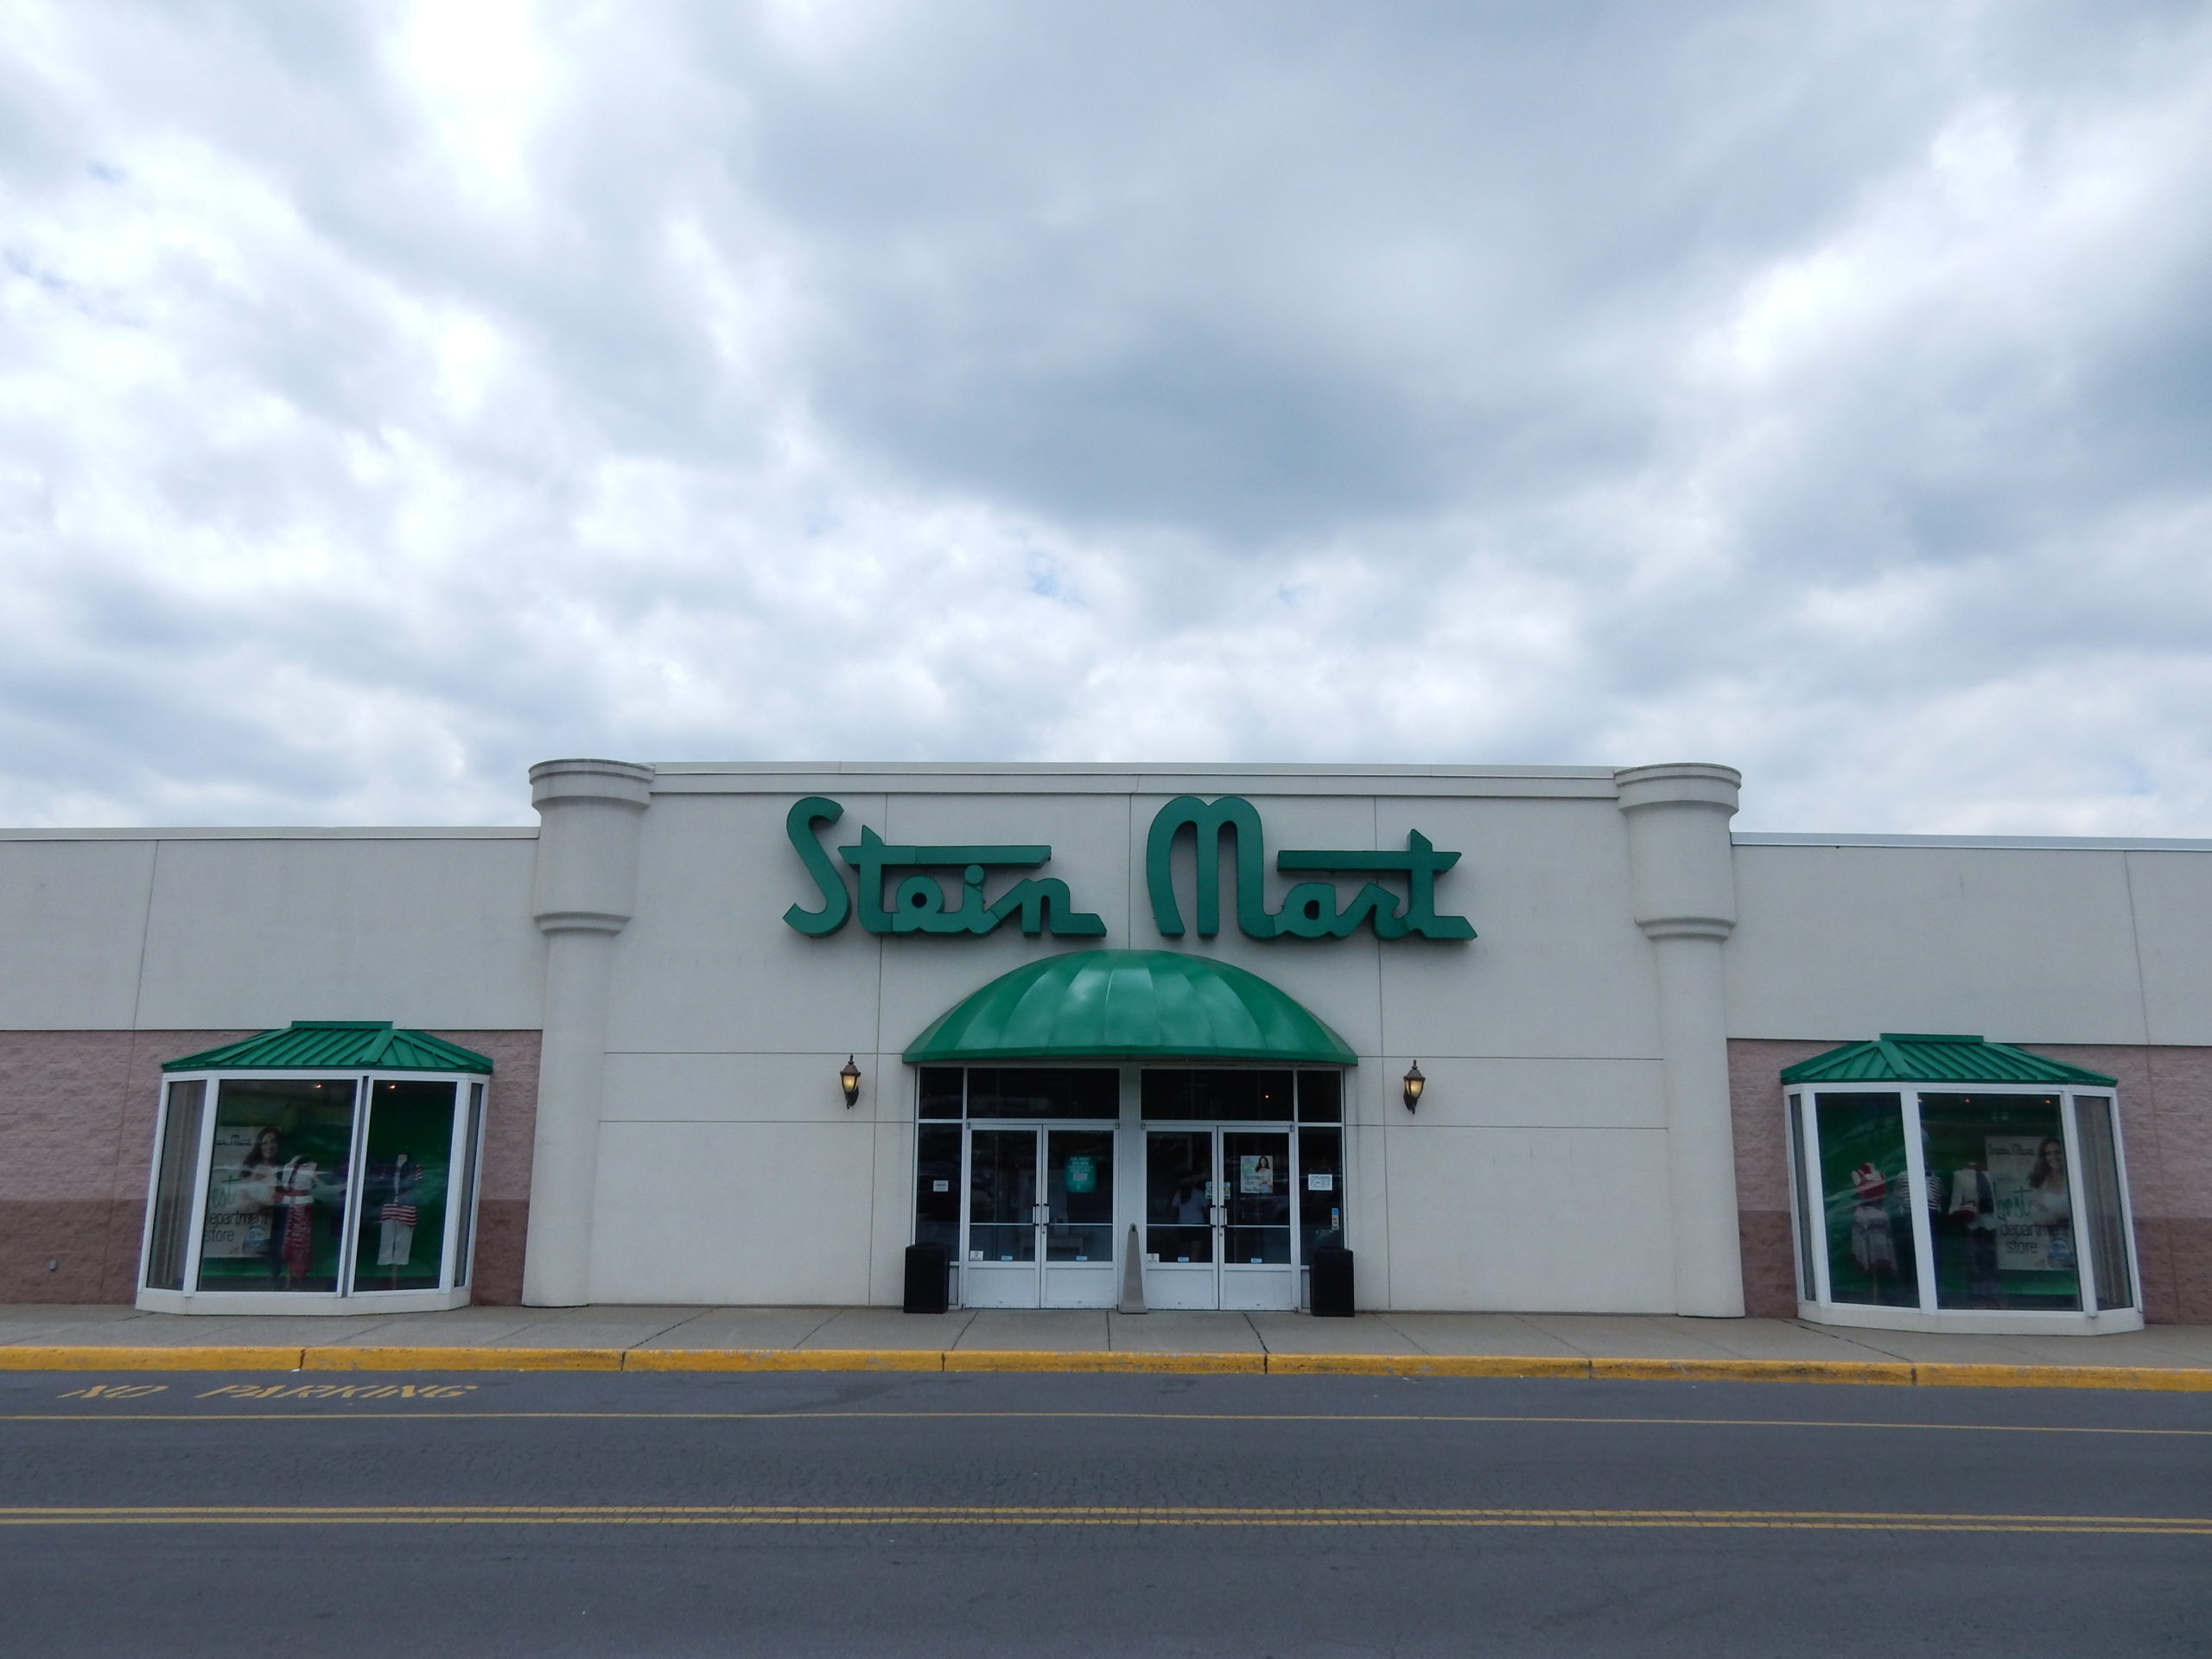 Corpus Christi's Stein Mart store could be among those set to close